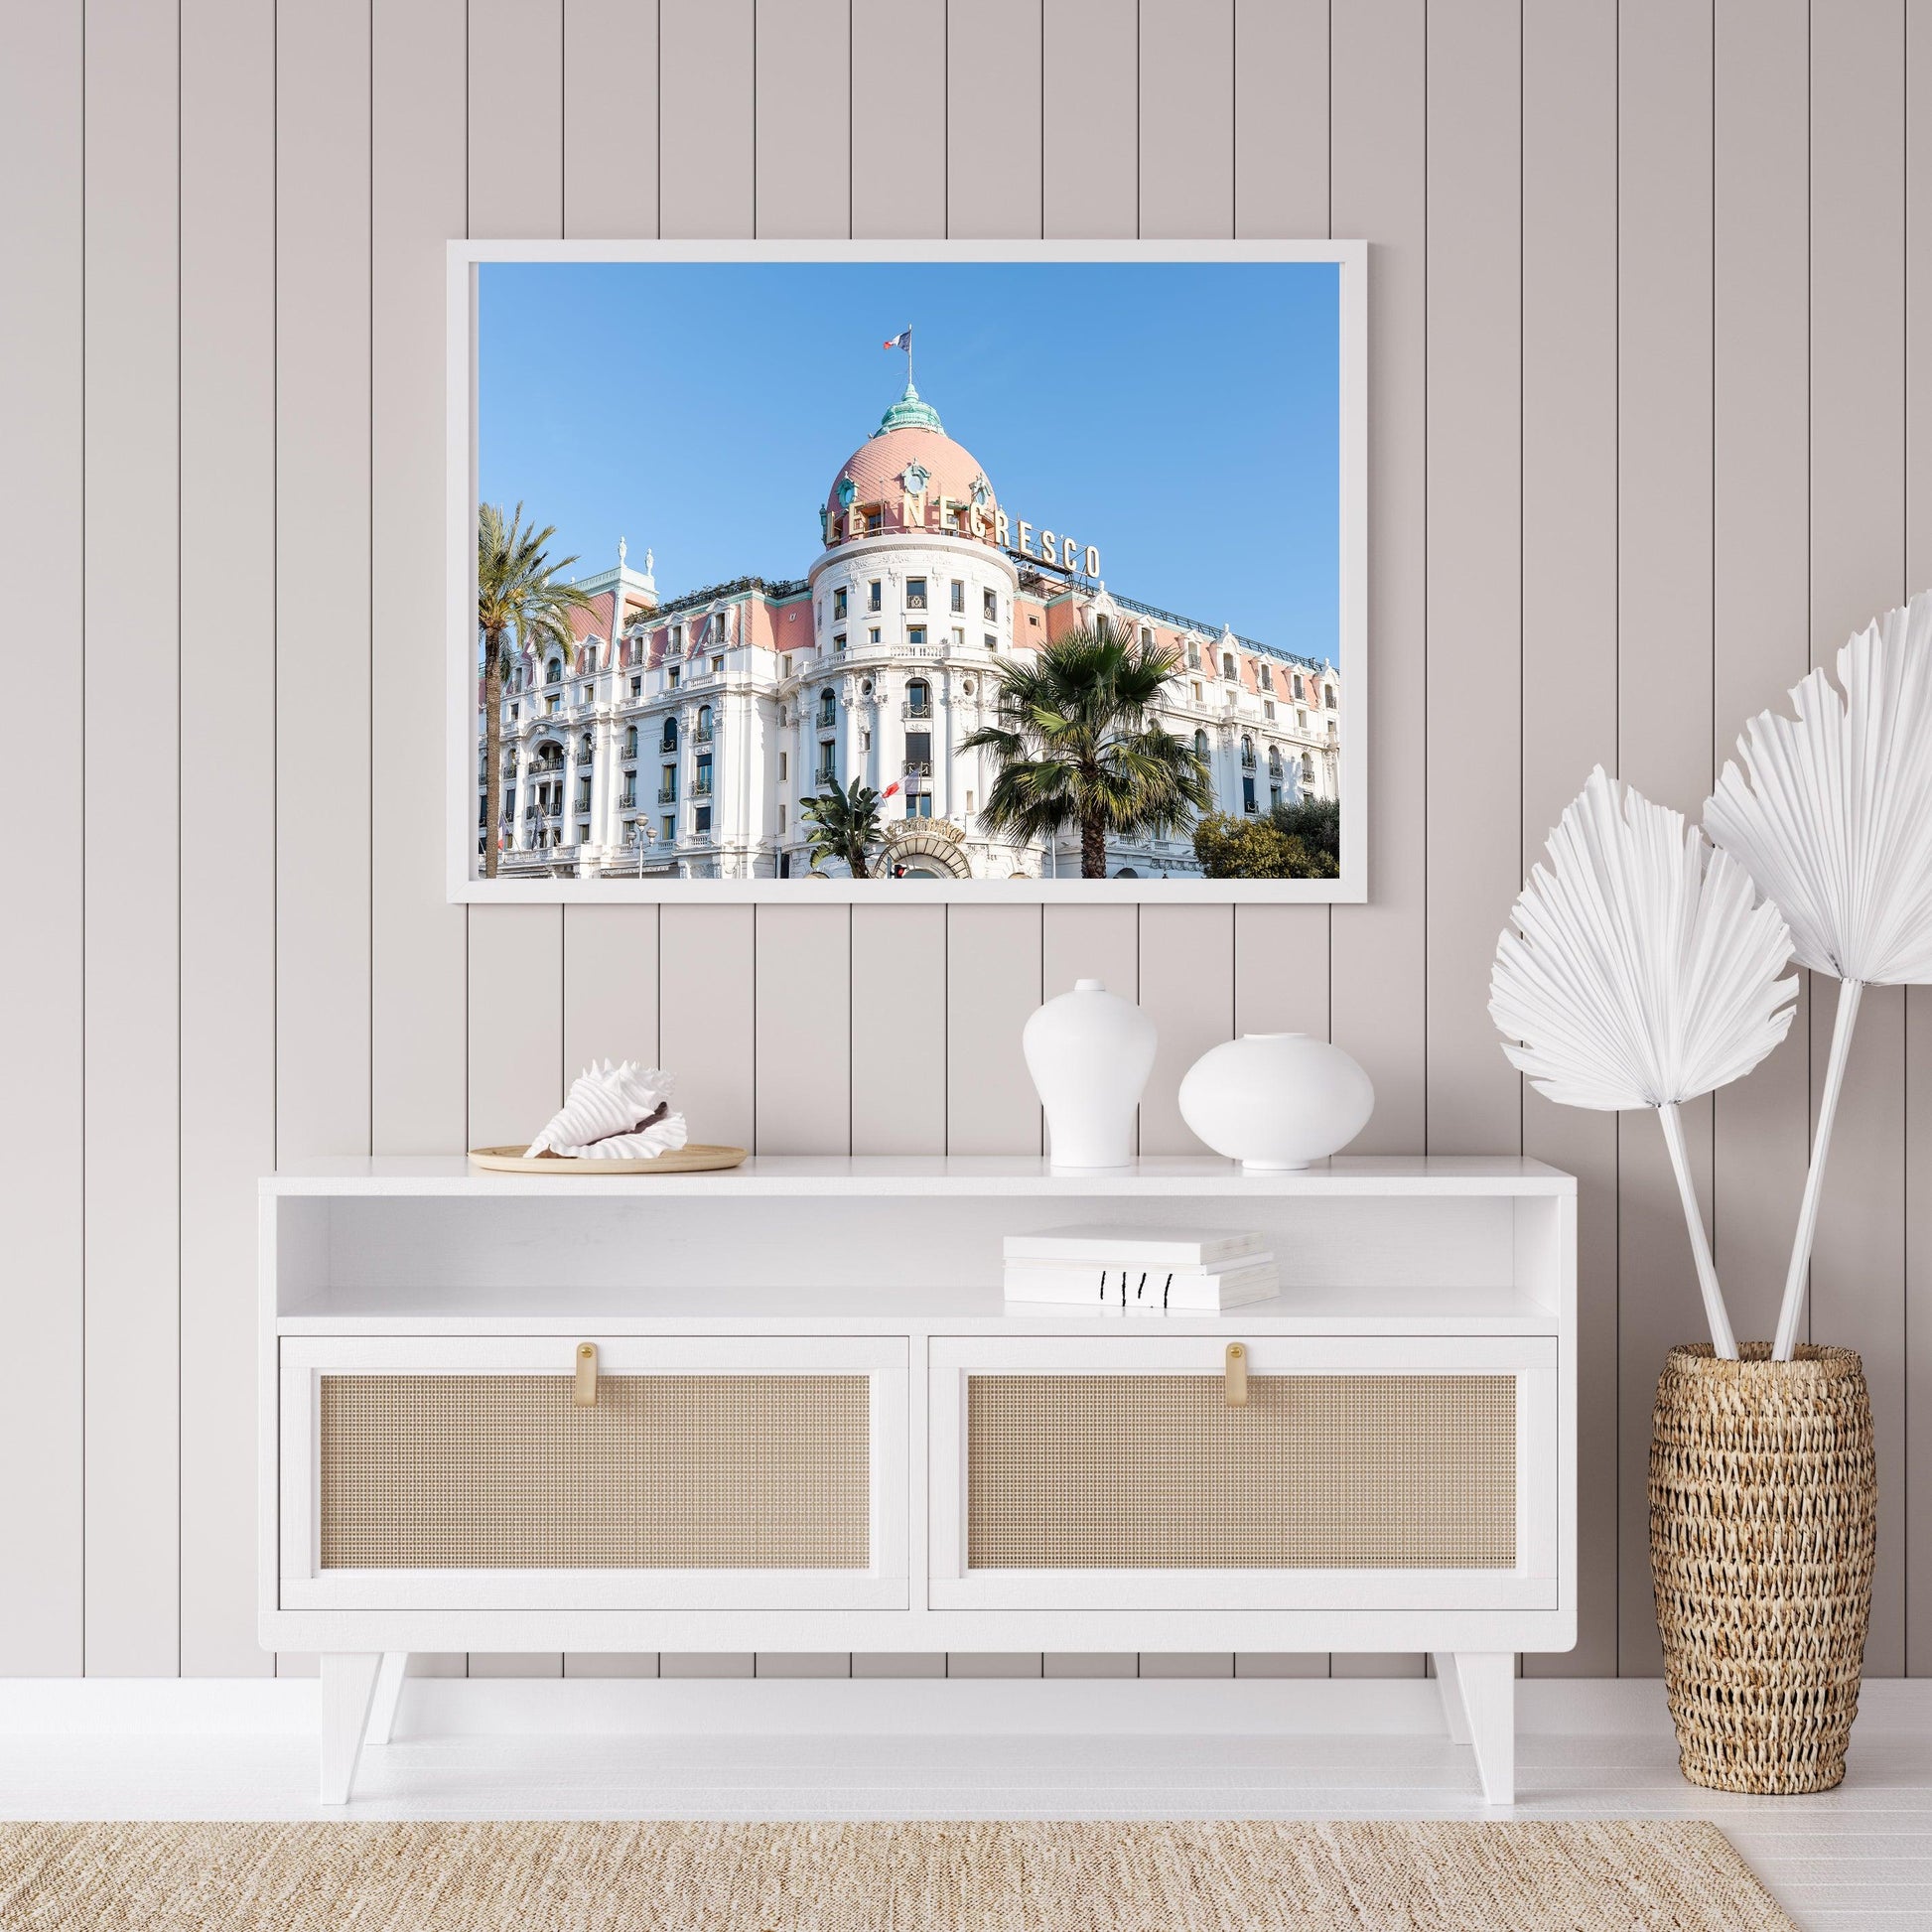 Le Negresco Hotel Nice France II | French Riviera Photography Print - Departures Print Shop